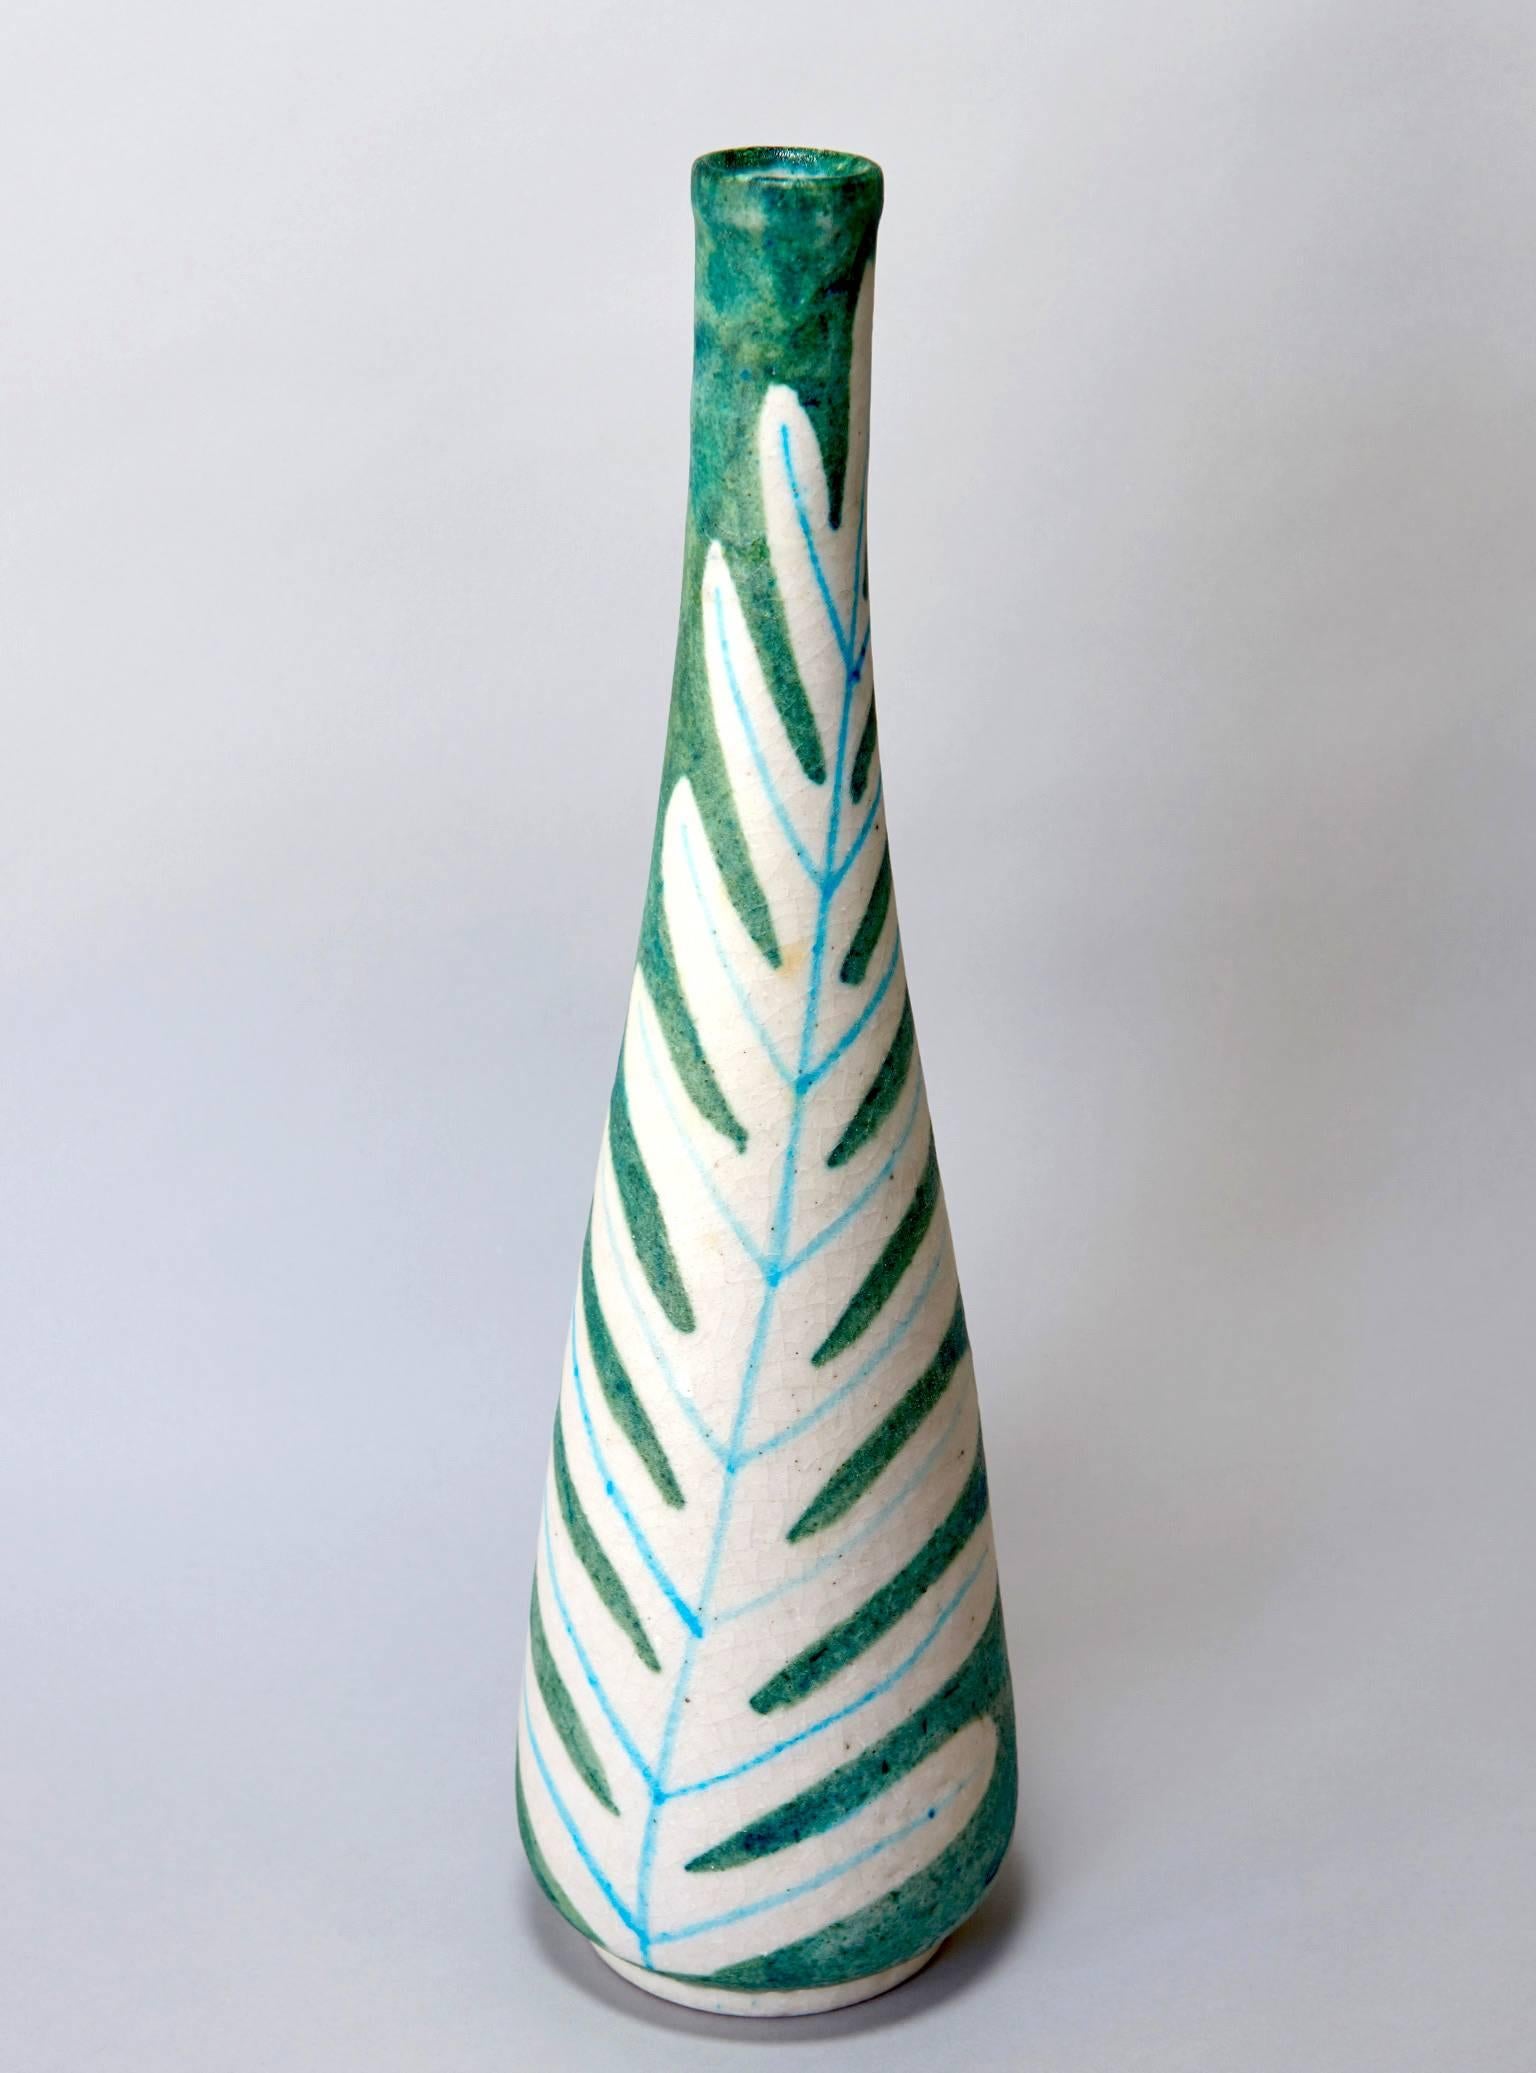 A tall vase by the greatest Italian ceramist of the post-war period. A stylized leaf decorates one half of the surface of the vessel, the other side being a variegated color field in a very lovely green. Signed GAMBONE ITALY with the artist's famous